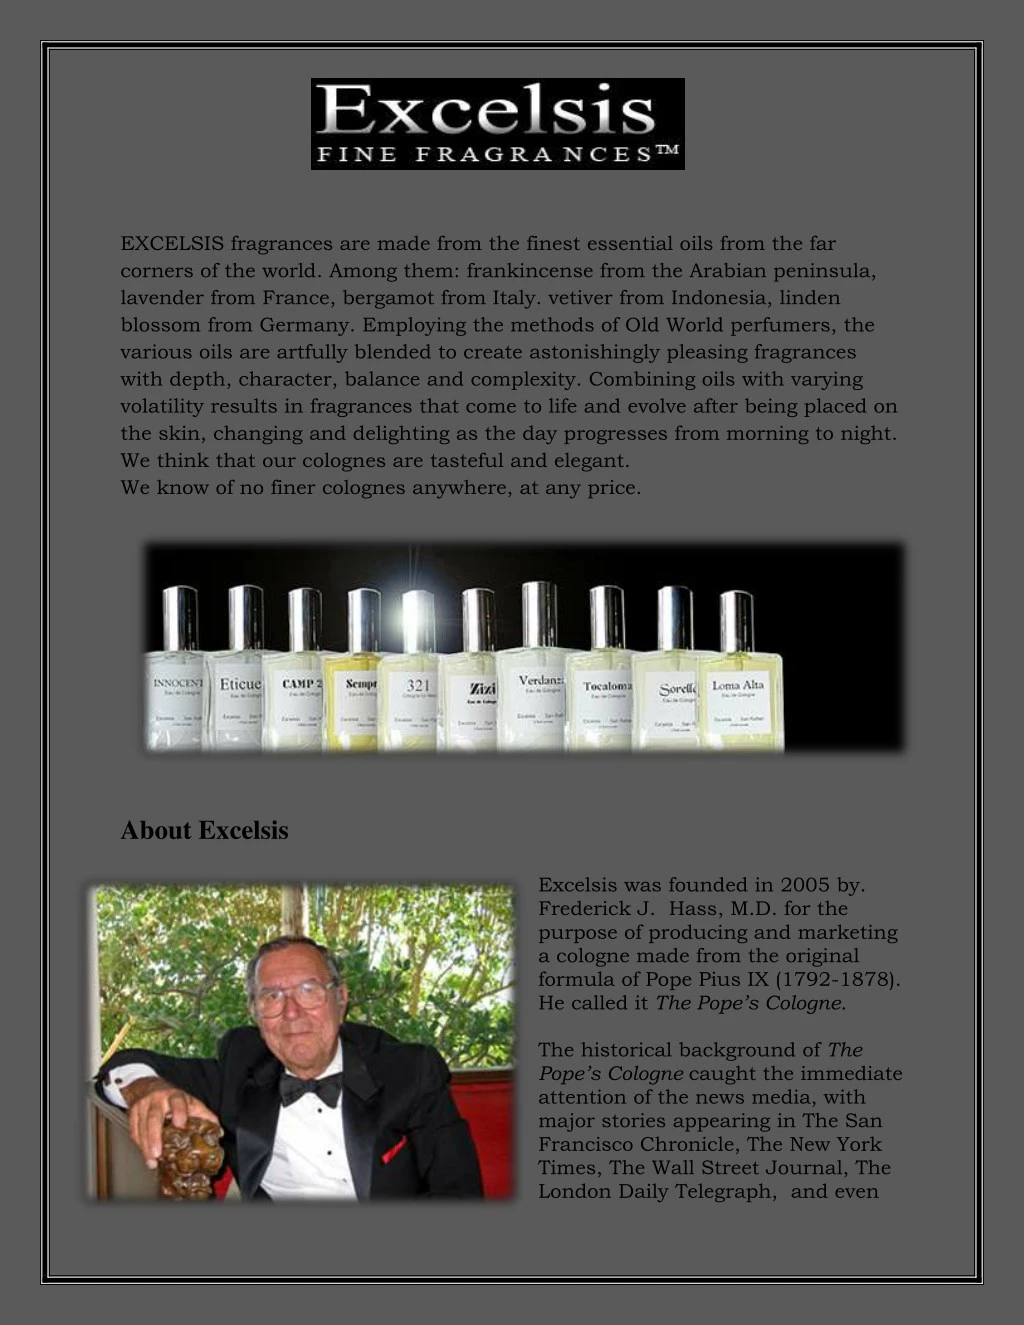 excelsis fragrances are made from the finest